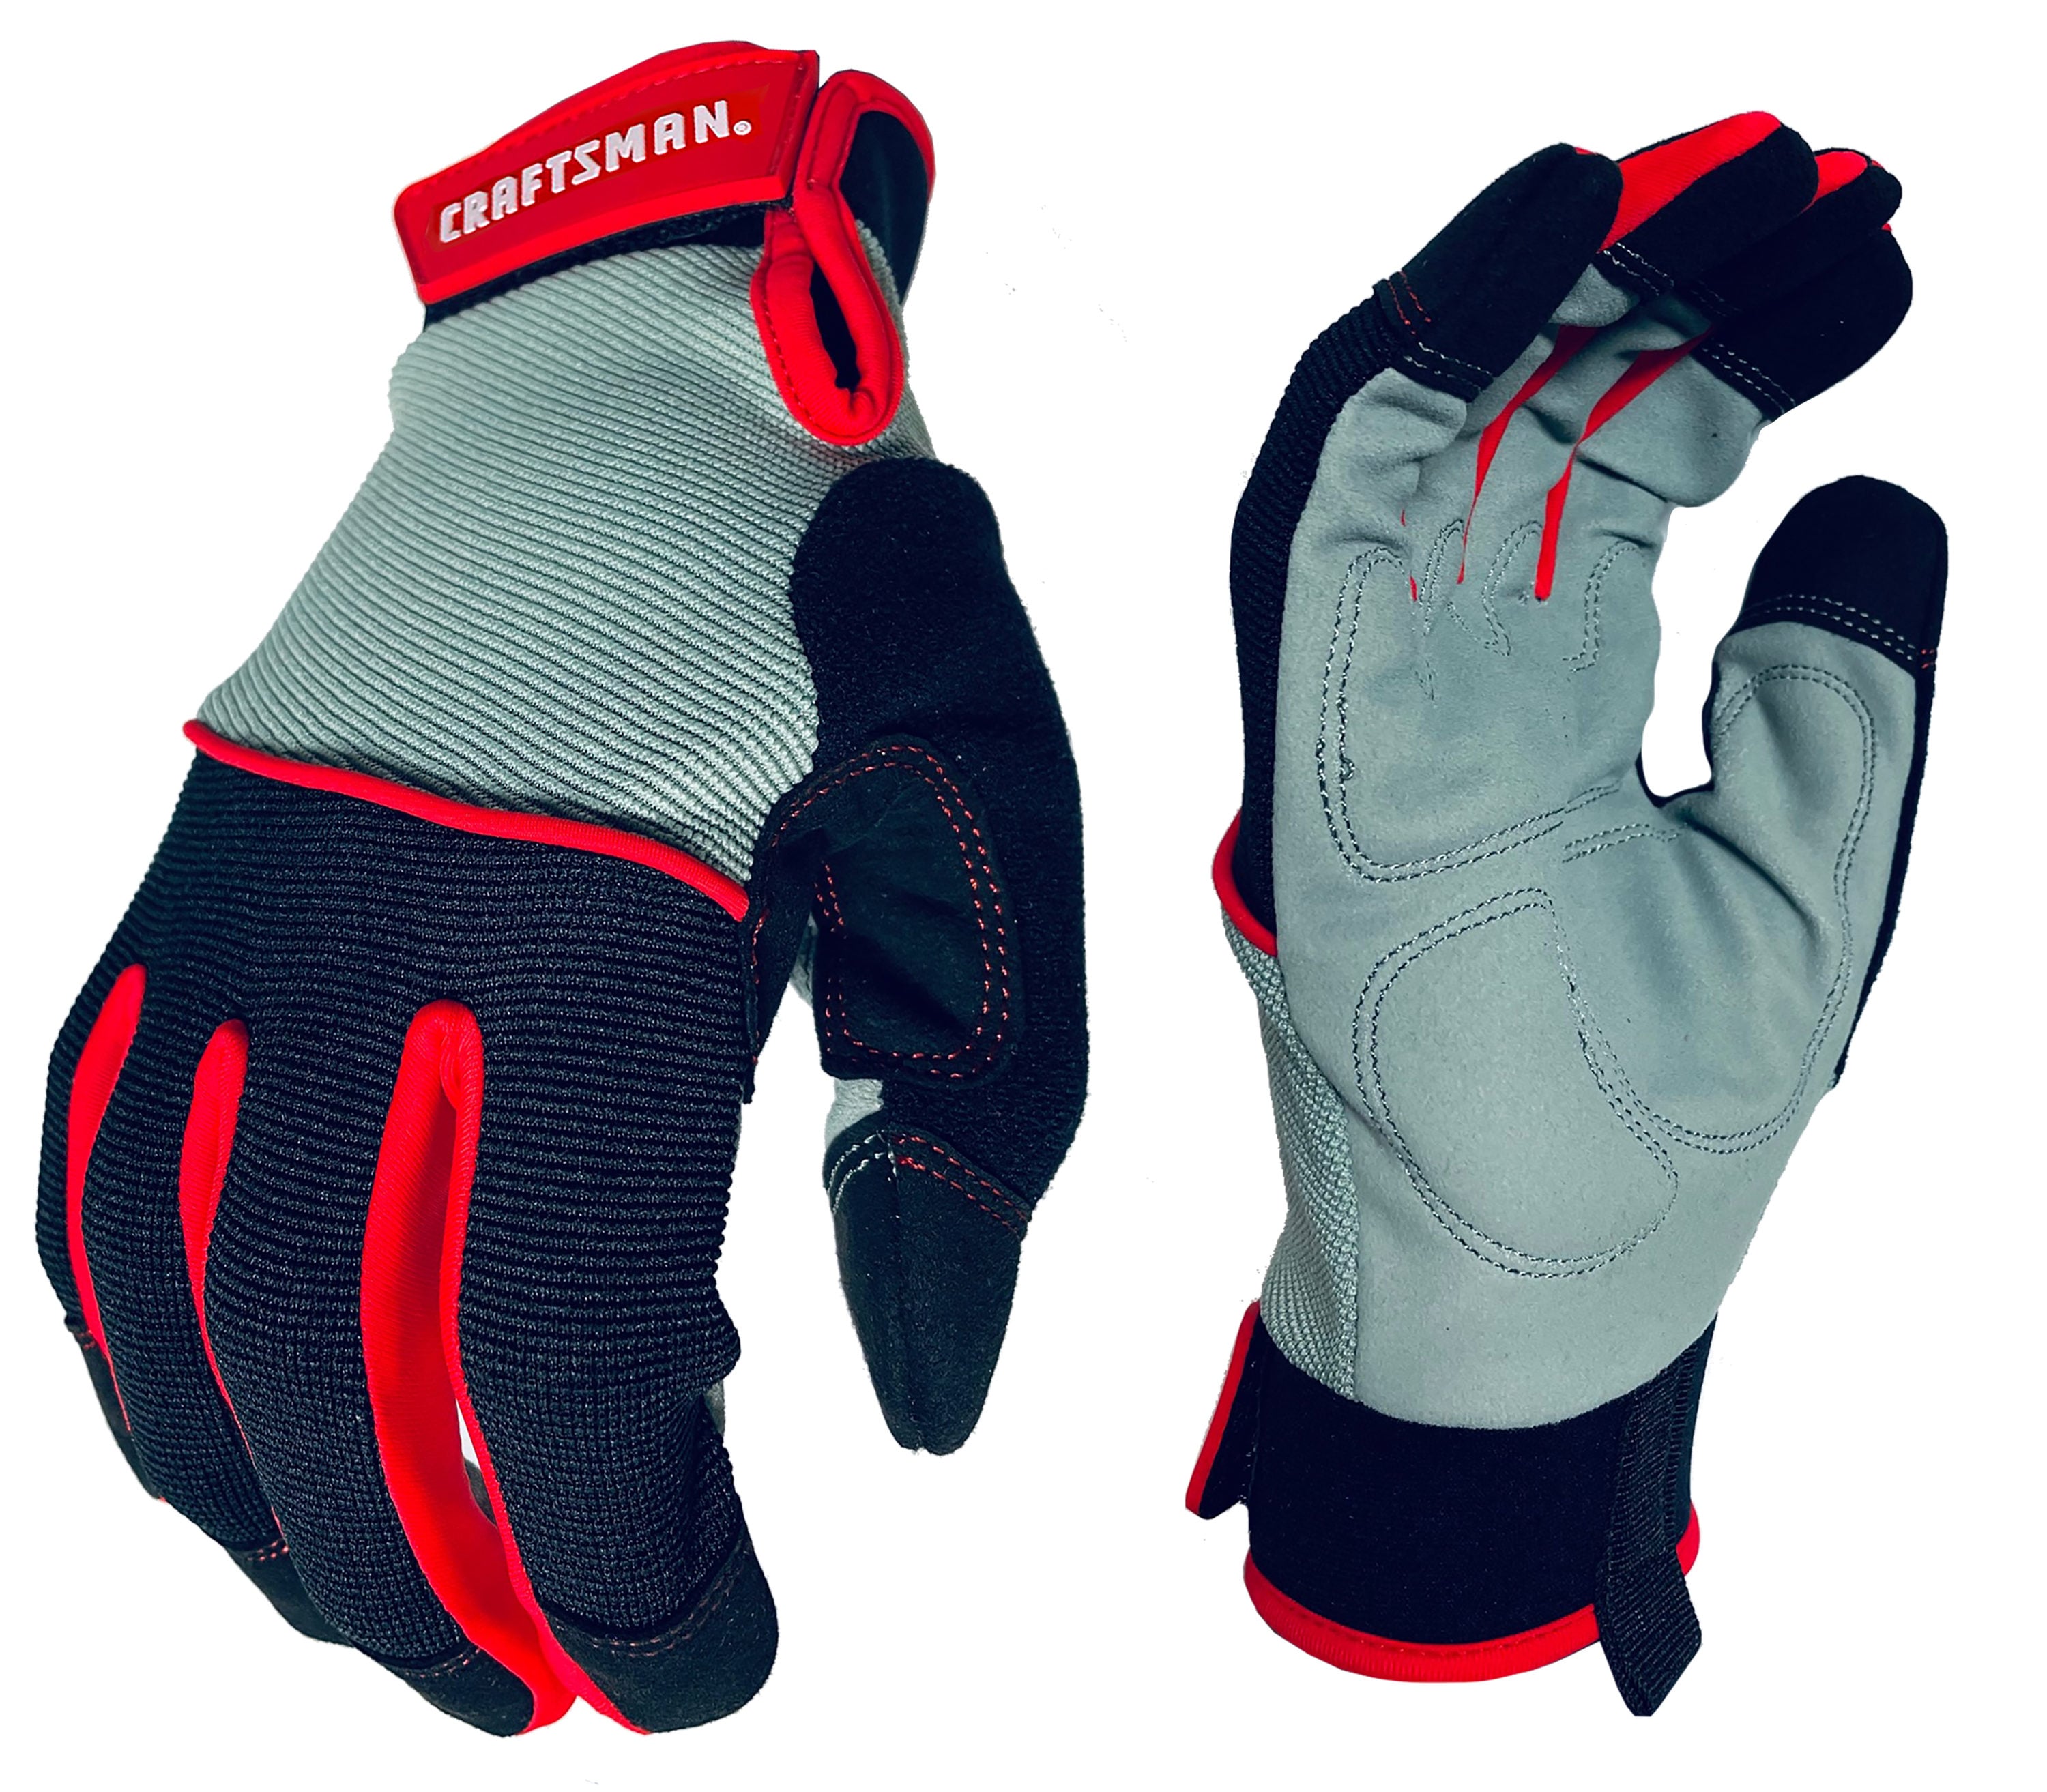 Mechanix Wear: Nitrile Coated SpeedKnit Thermal Work Gloves - Touch  Capable, Insulated, High Abrasion Resistance and Dry Grip Performance  (Black, Small) 